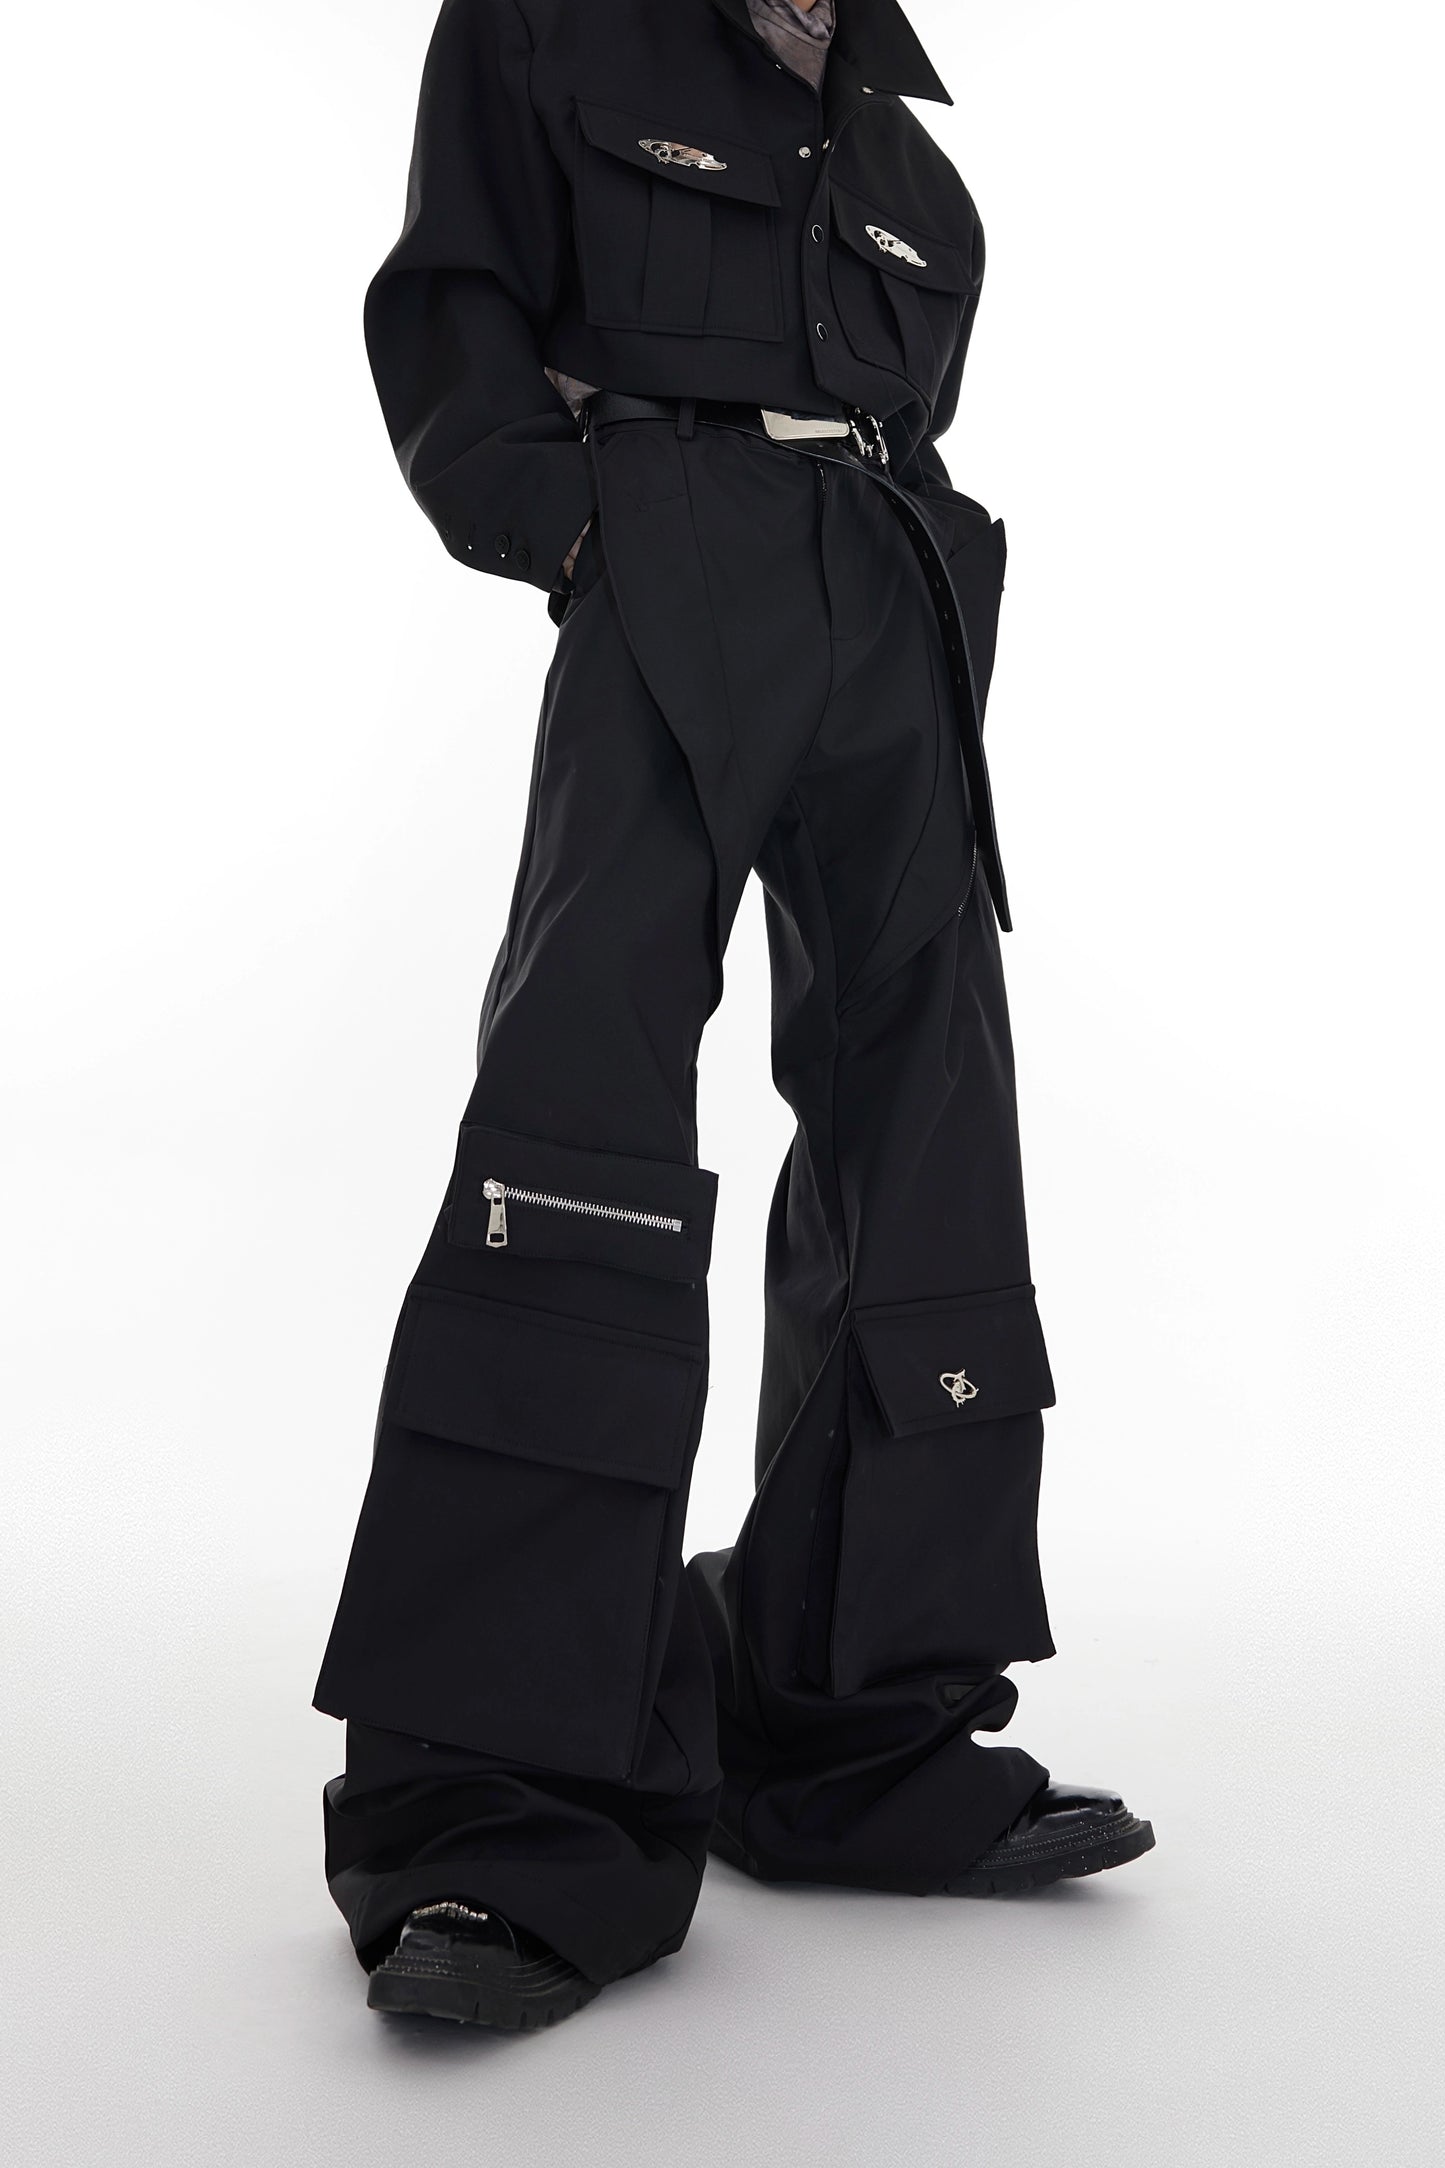 CulturE niche deconstructs large pocket panels, trousers, micro-flared high-waisted slacks, metal design trousers